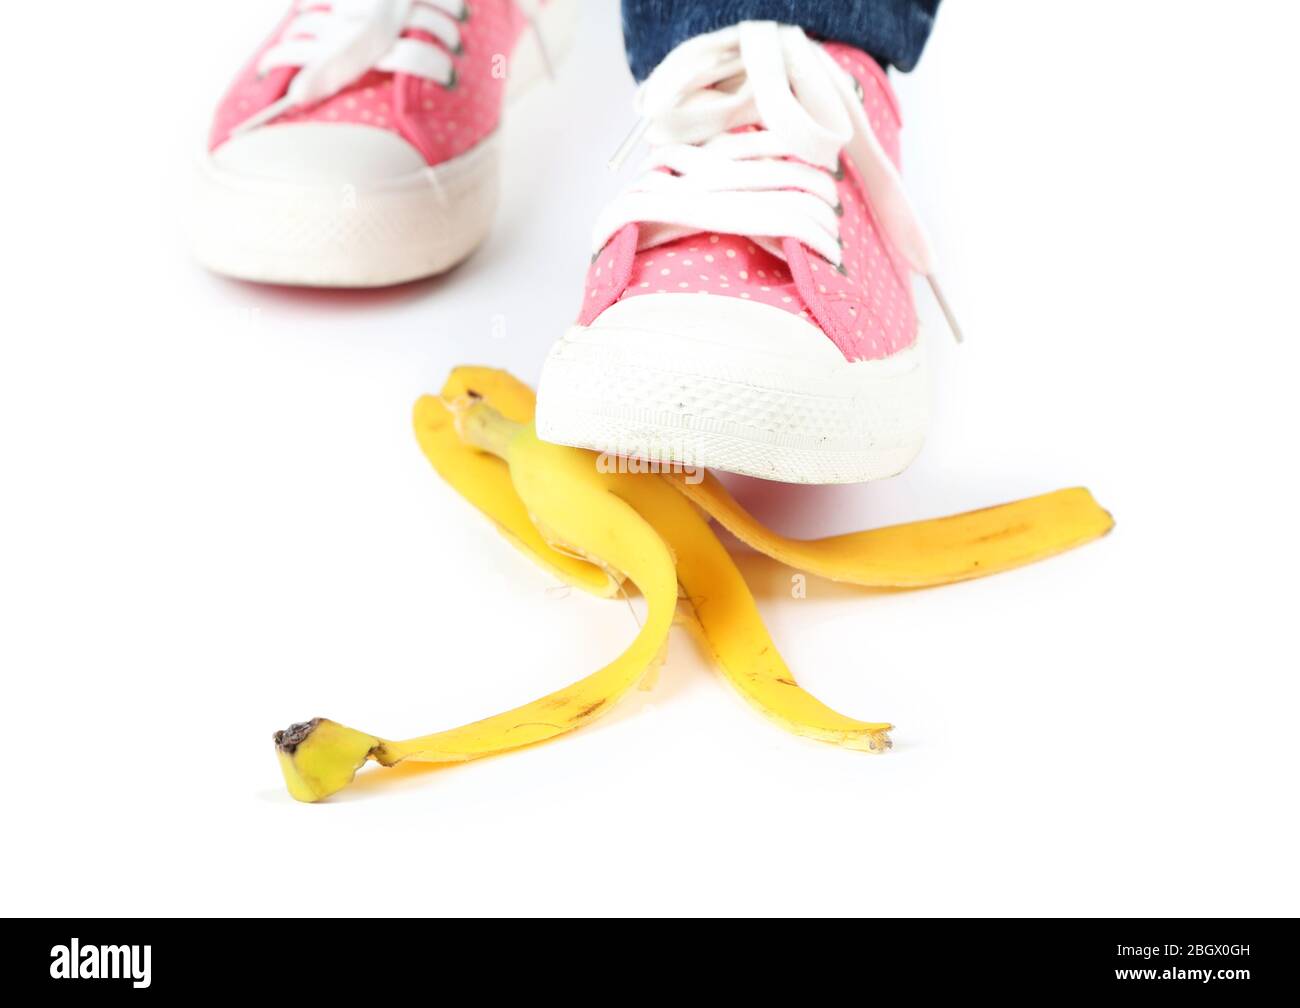 Shoe to slip on banana peel and have an accident, isolated on white ...